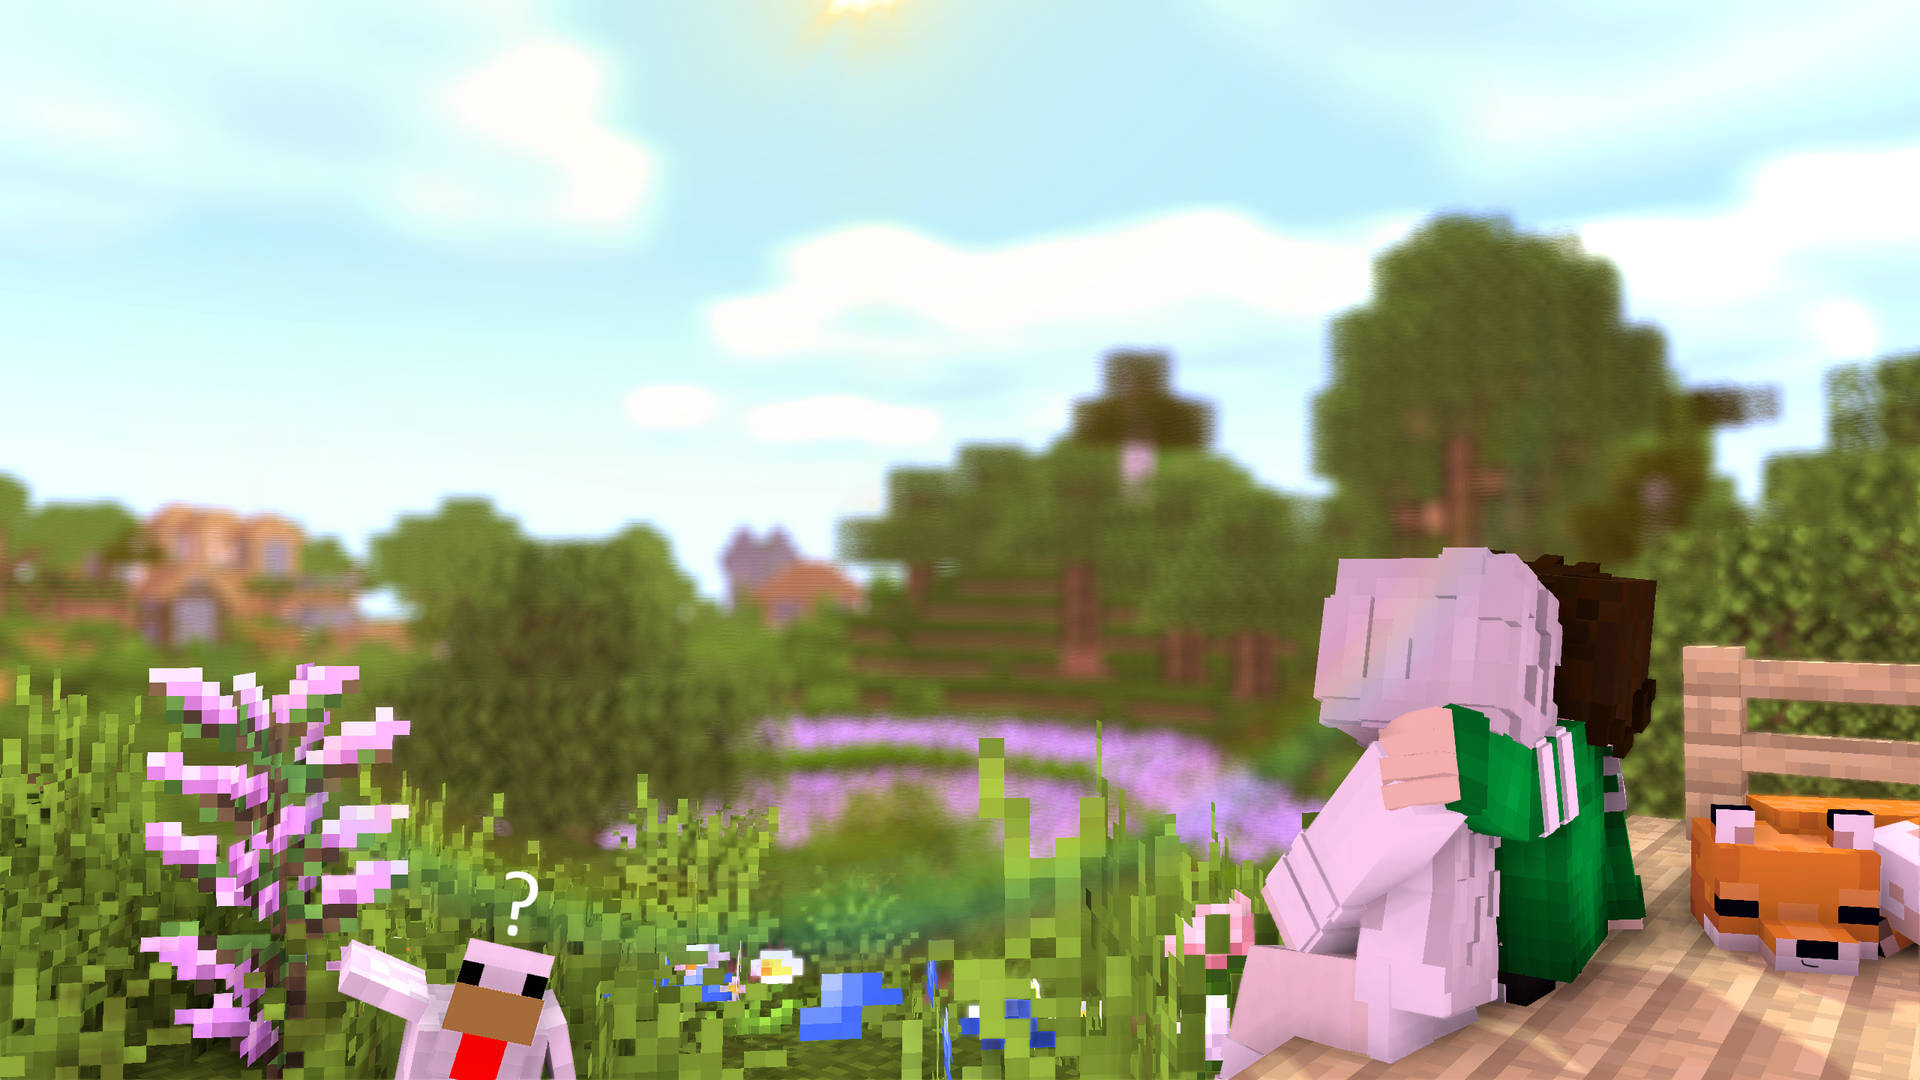 Minecraft Aesthetic Characters In Garden Picture